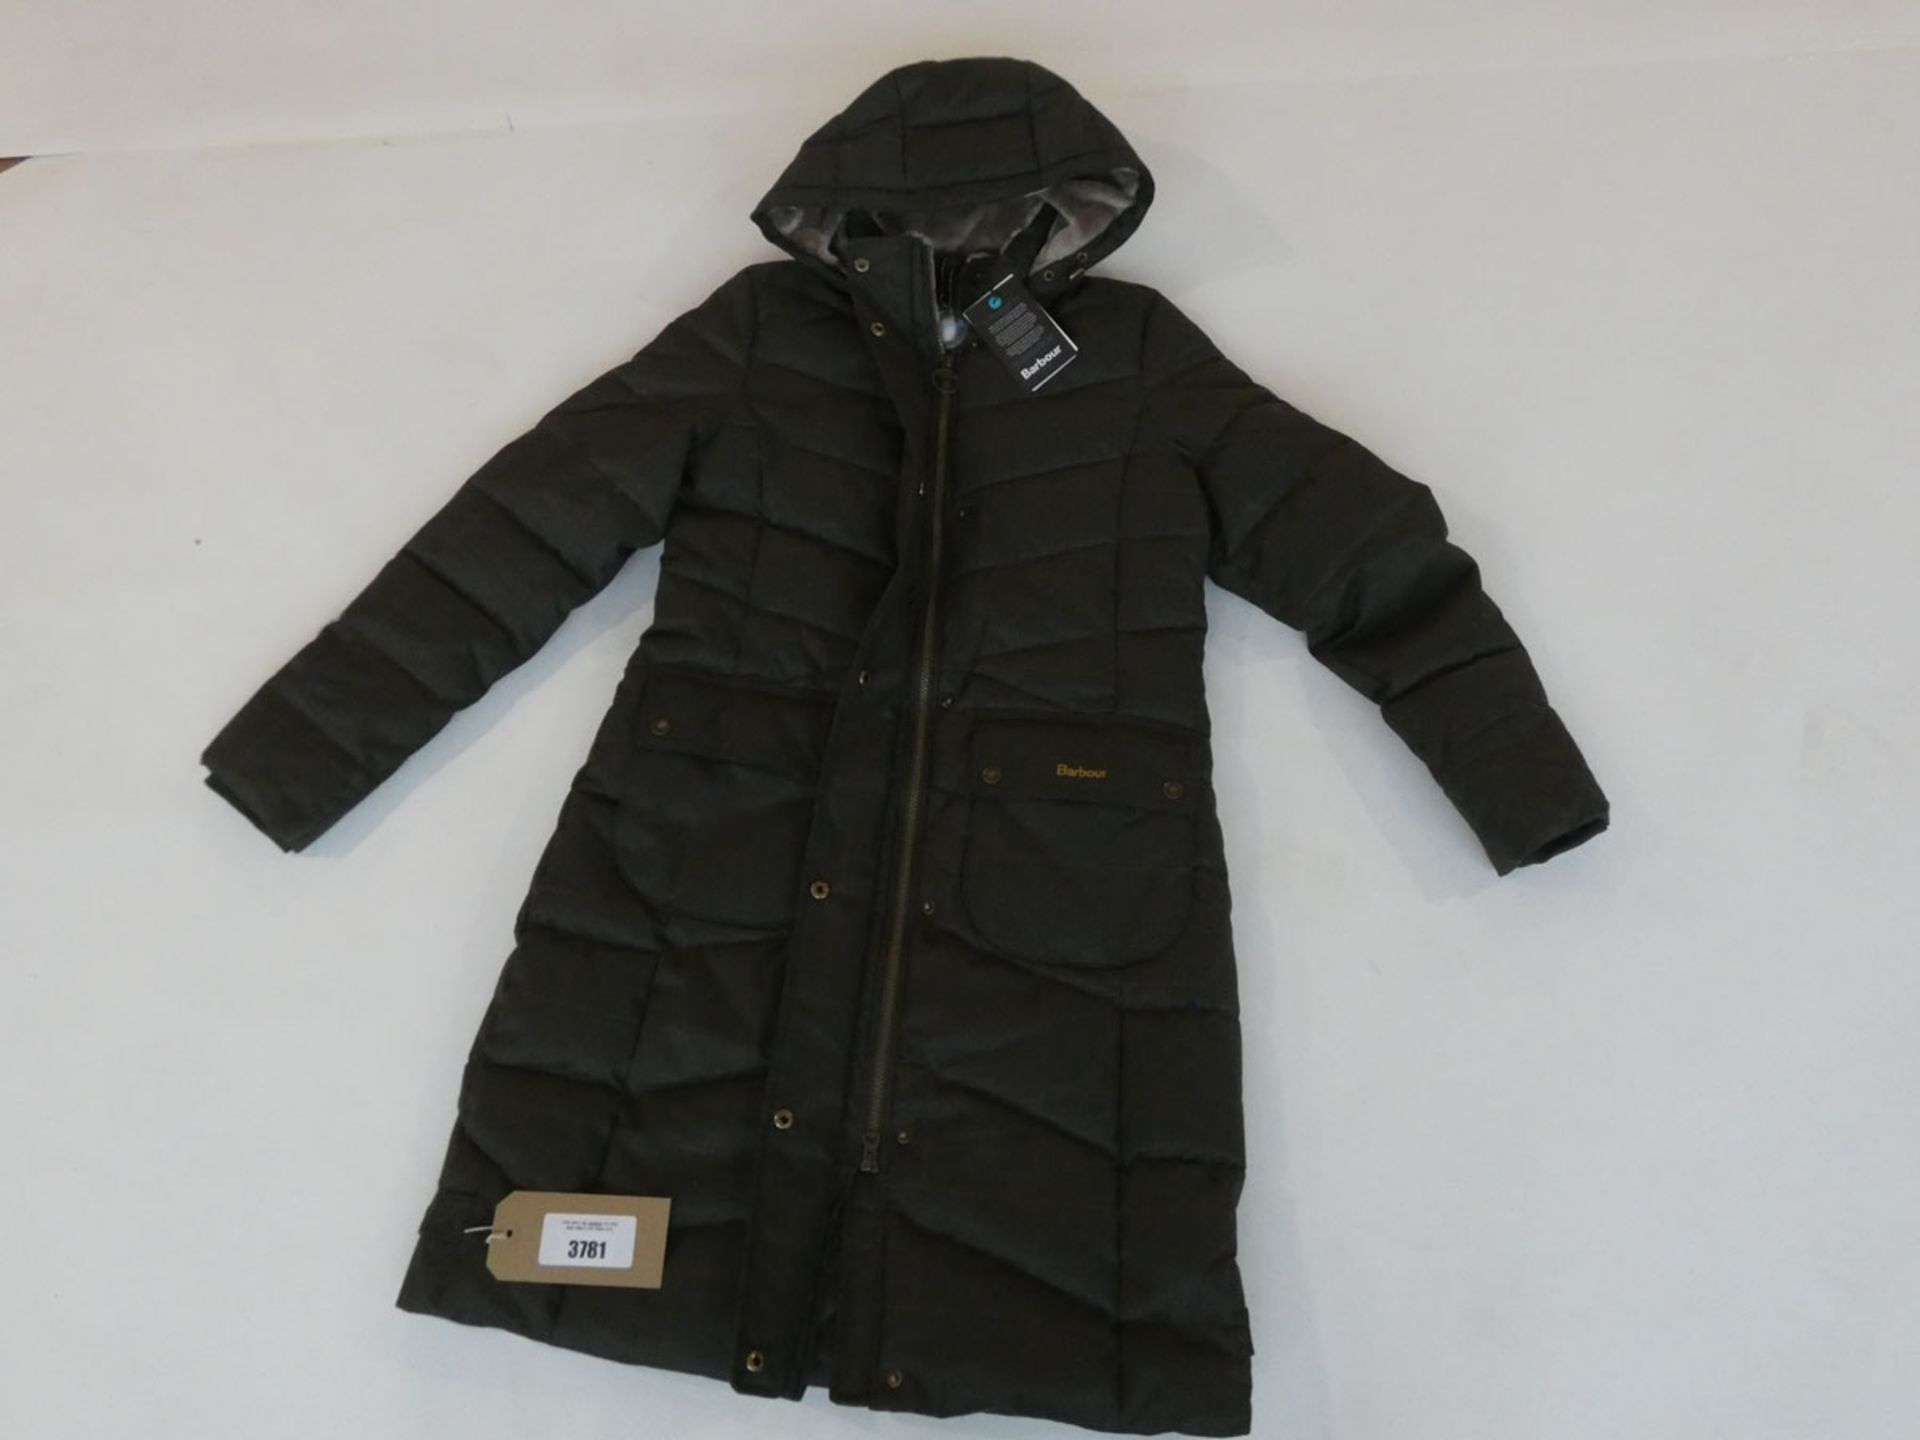 Barbour ladies kingston quilted jacket size 10